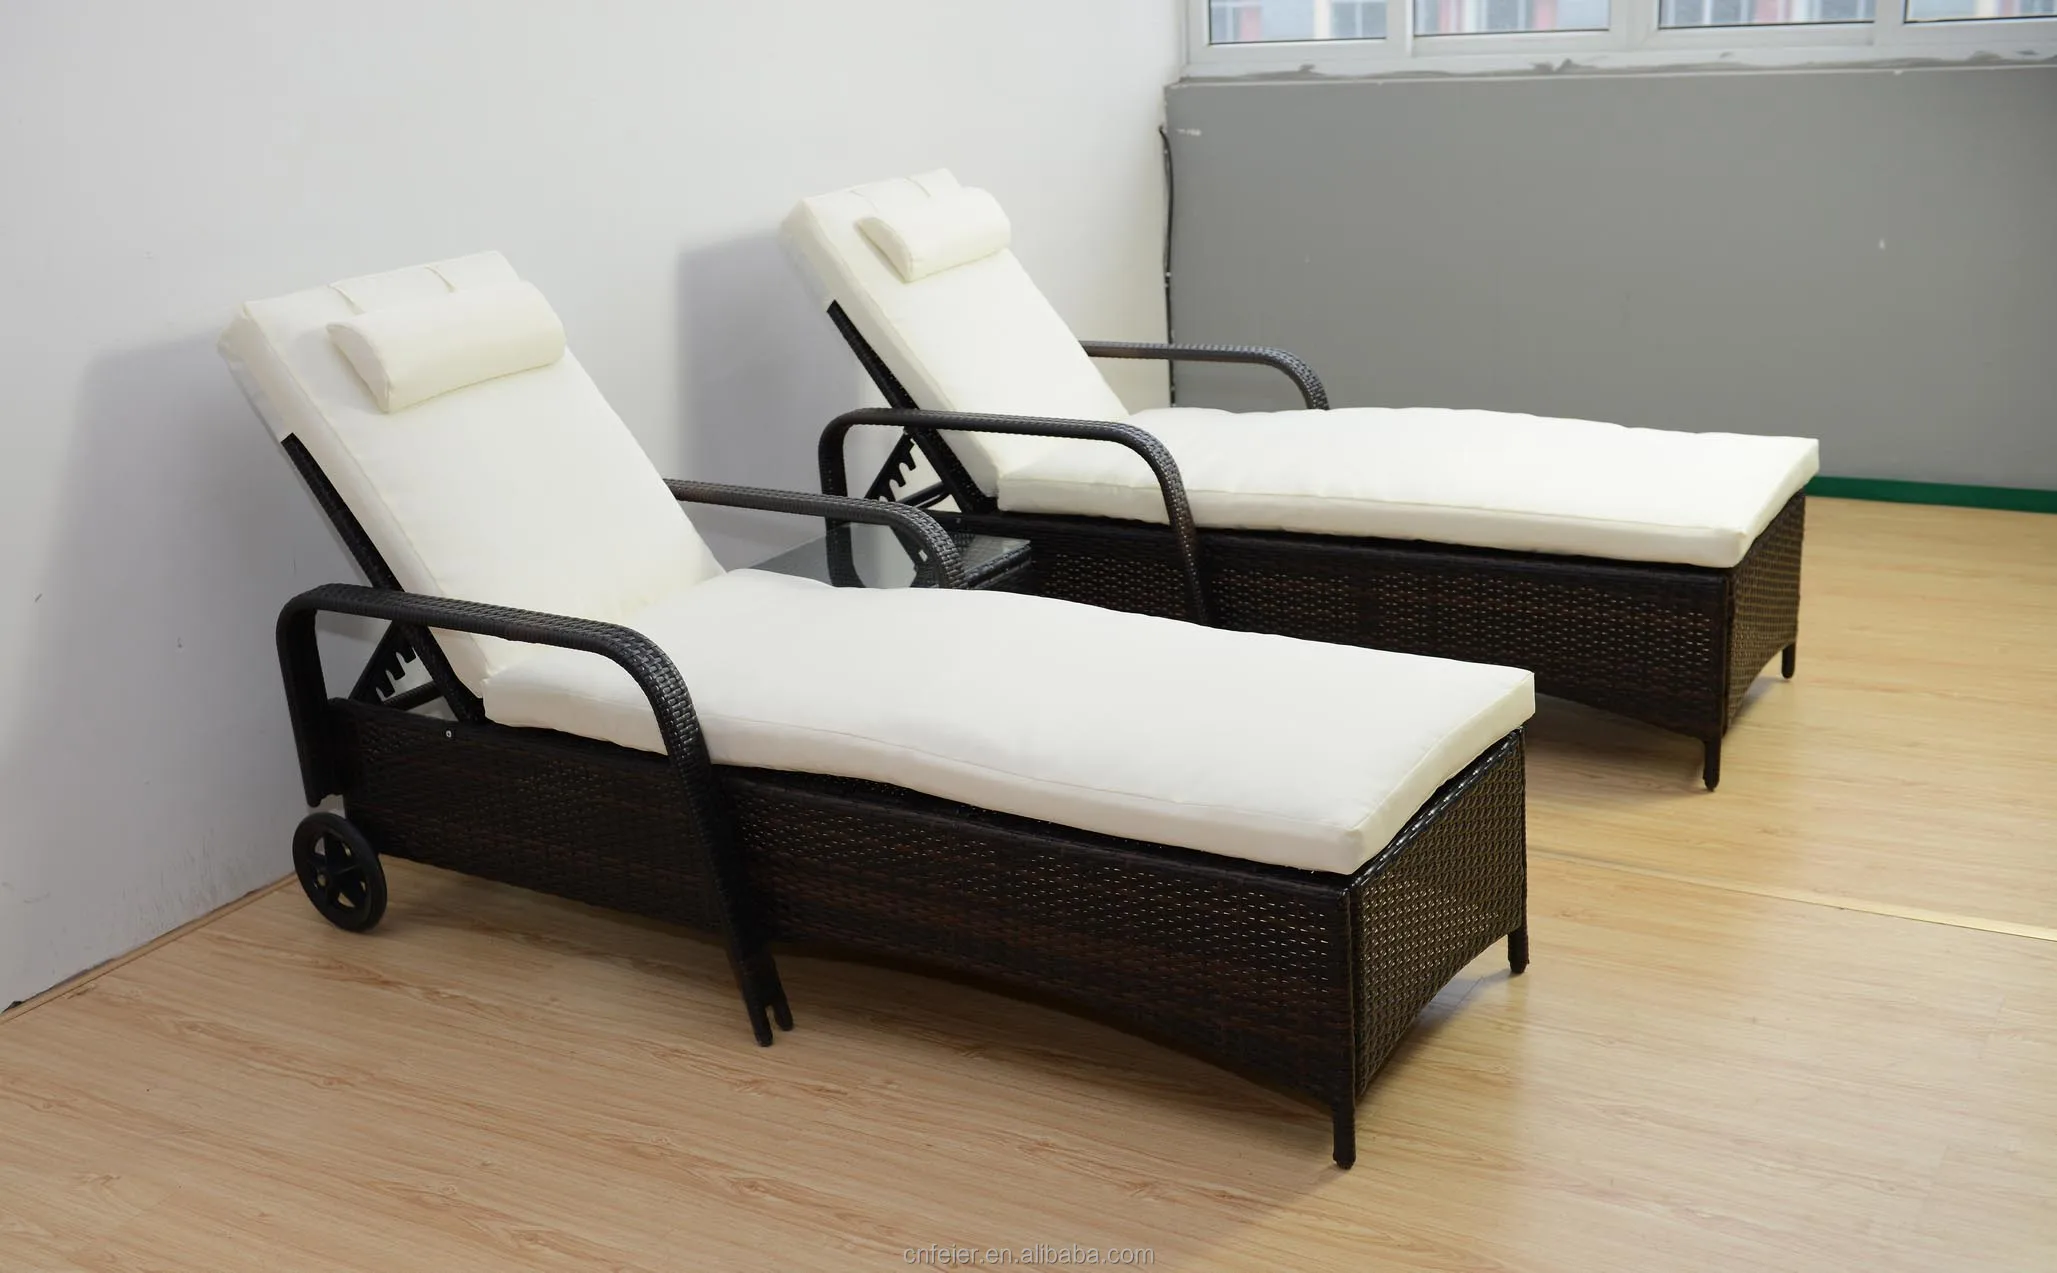 Synthetic Rattan Outdoor Furniture Philippines Mail | Chaise Design